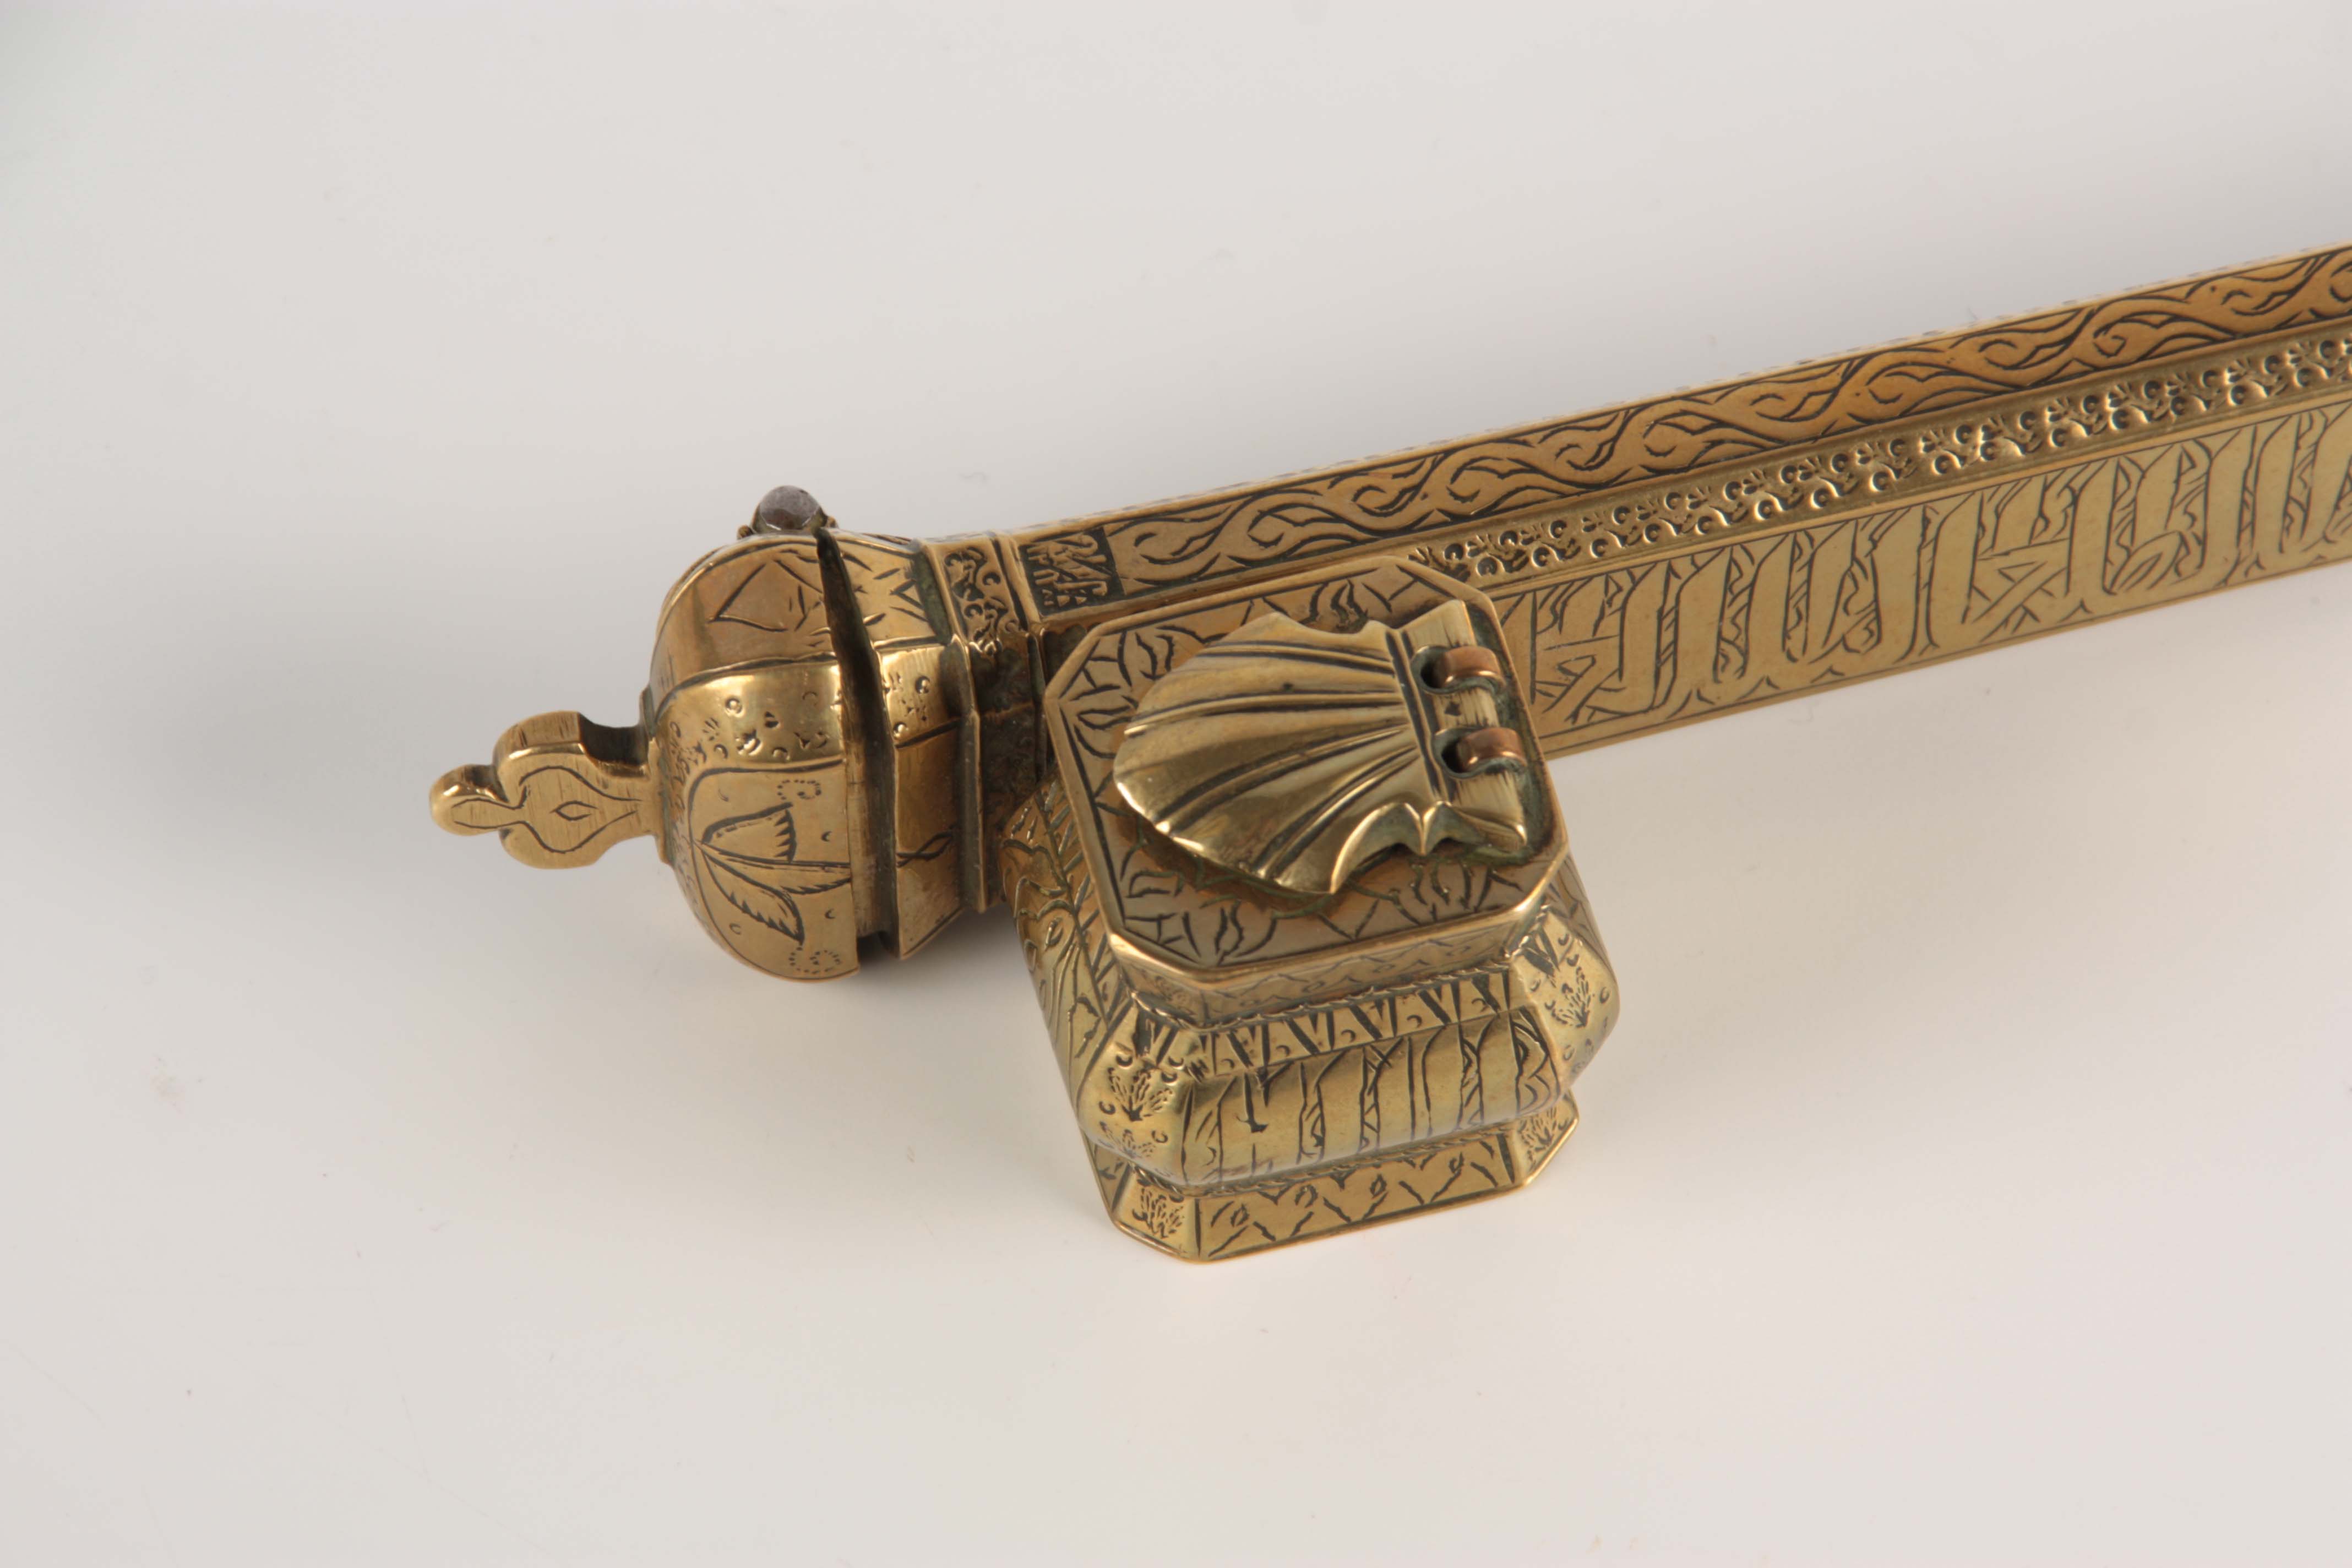 A 19TH CENTURY SIGNED MIDDLE EASTERN BRASS INKWELL QALAMDAN with Arabic calligraphy to the sides. - Image 2 of 4